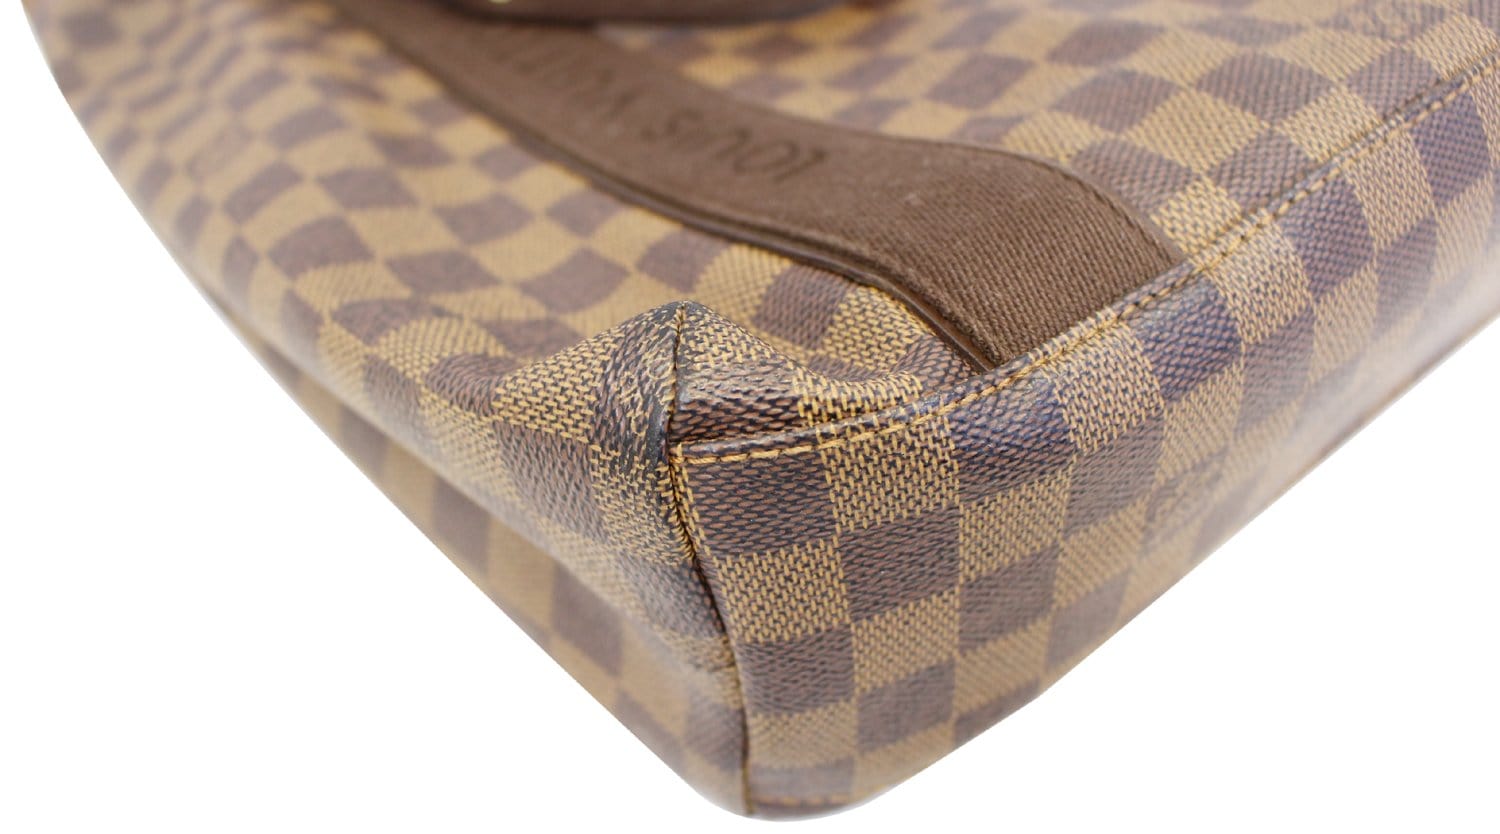 M53013 – dct - Louis - Beaubourg - Monogram - Tote - first look